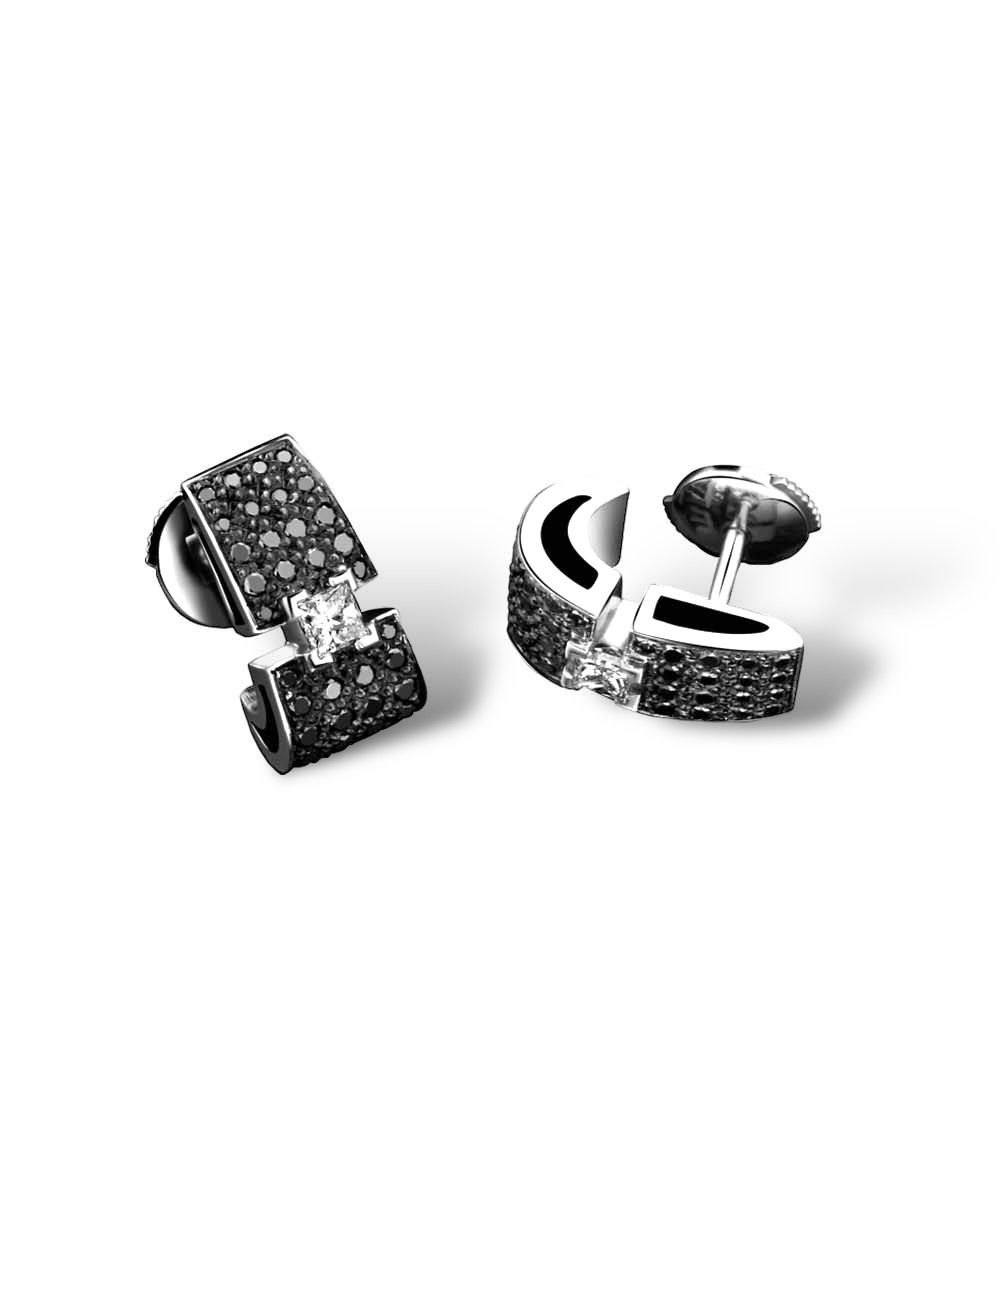 Modern elegance with white gold earrings and white and black diamonds.